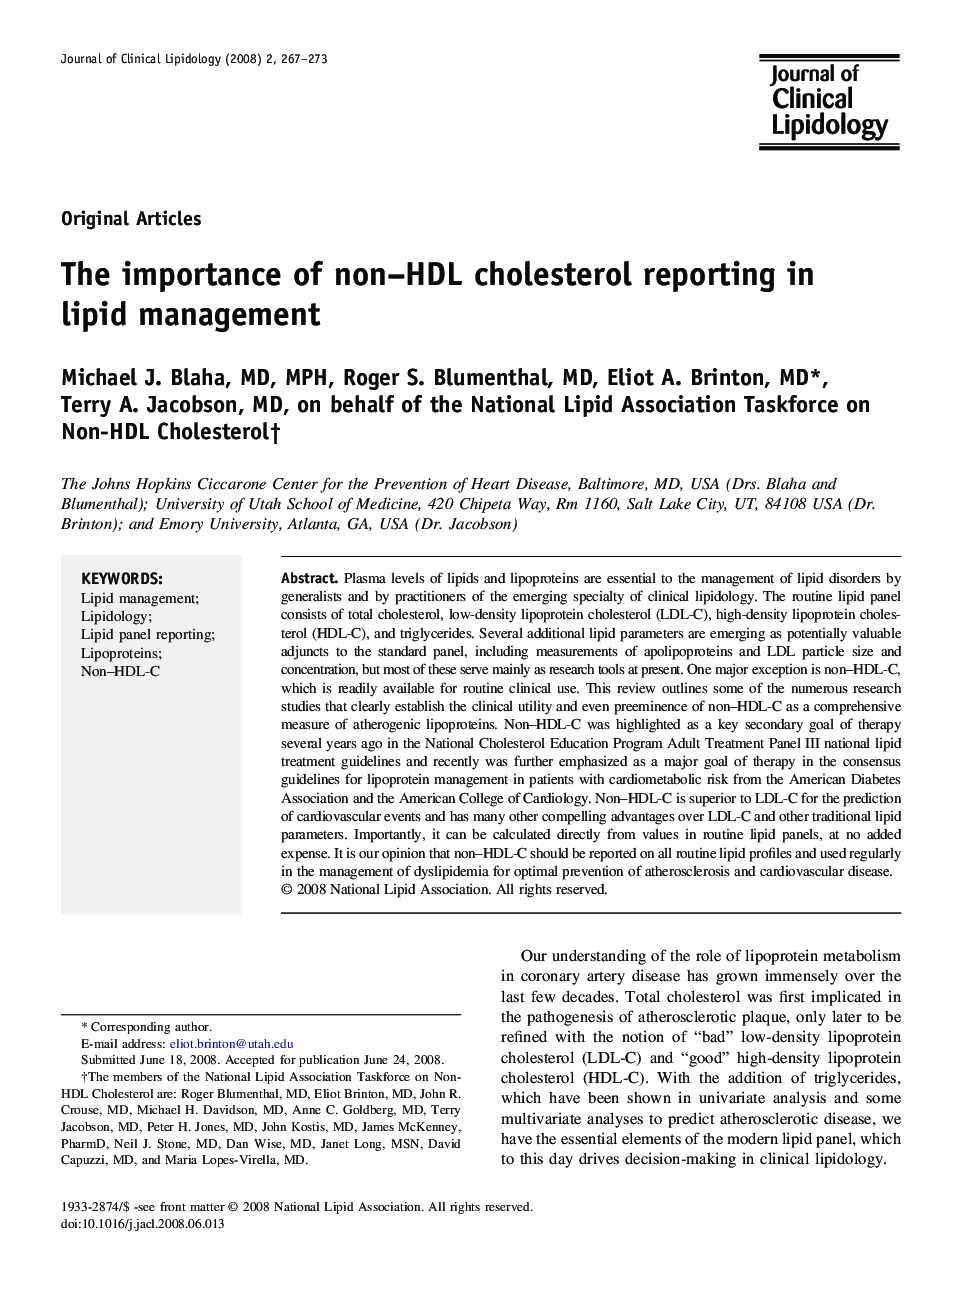 The importance of non–HDL cholesterol reporting in lipid management